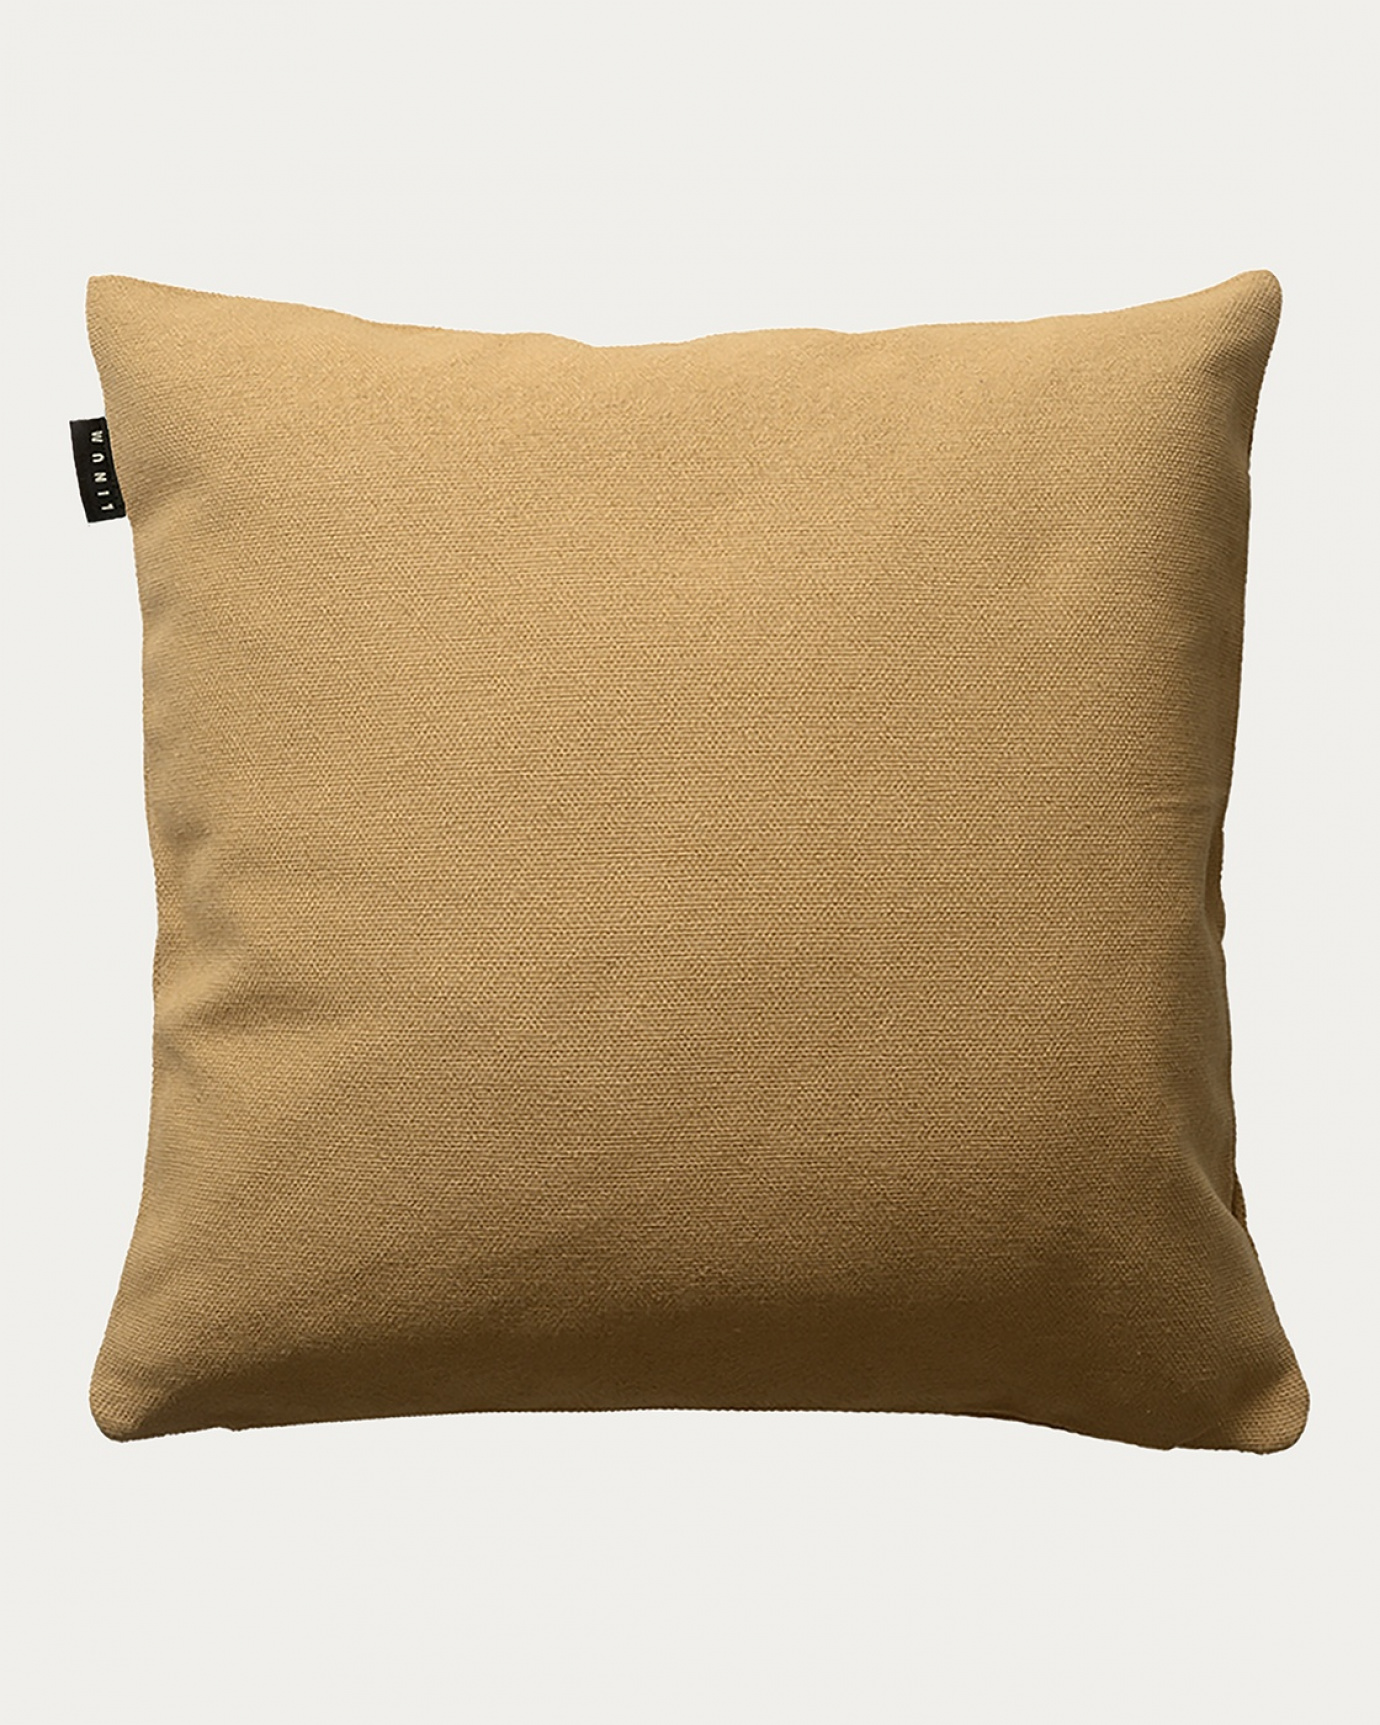 Product image straw yellow PEPPER cushion cover made of soft cotton from LINUM DESIGN. Easy to wash and durable for generations. Size 60x60 cm.